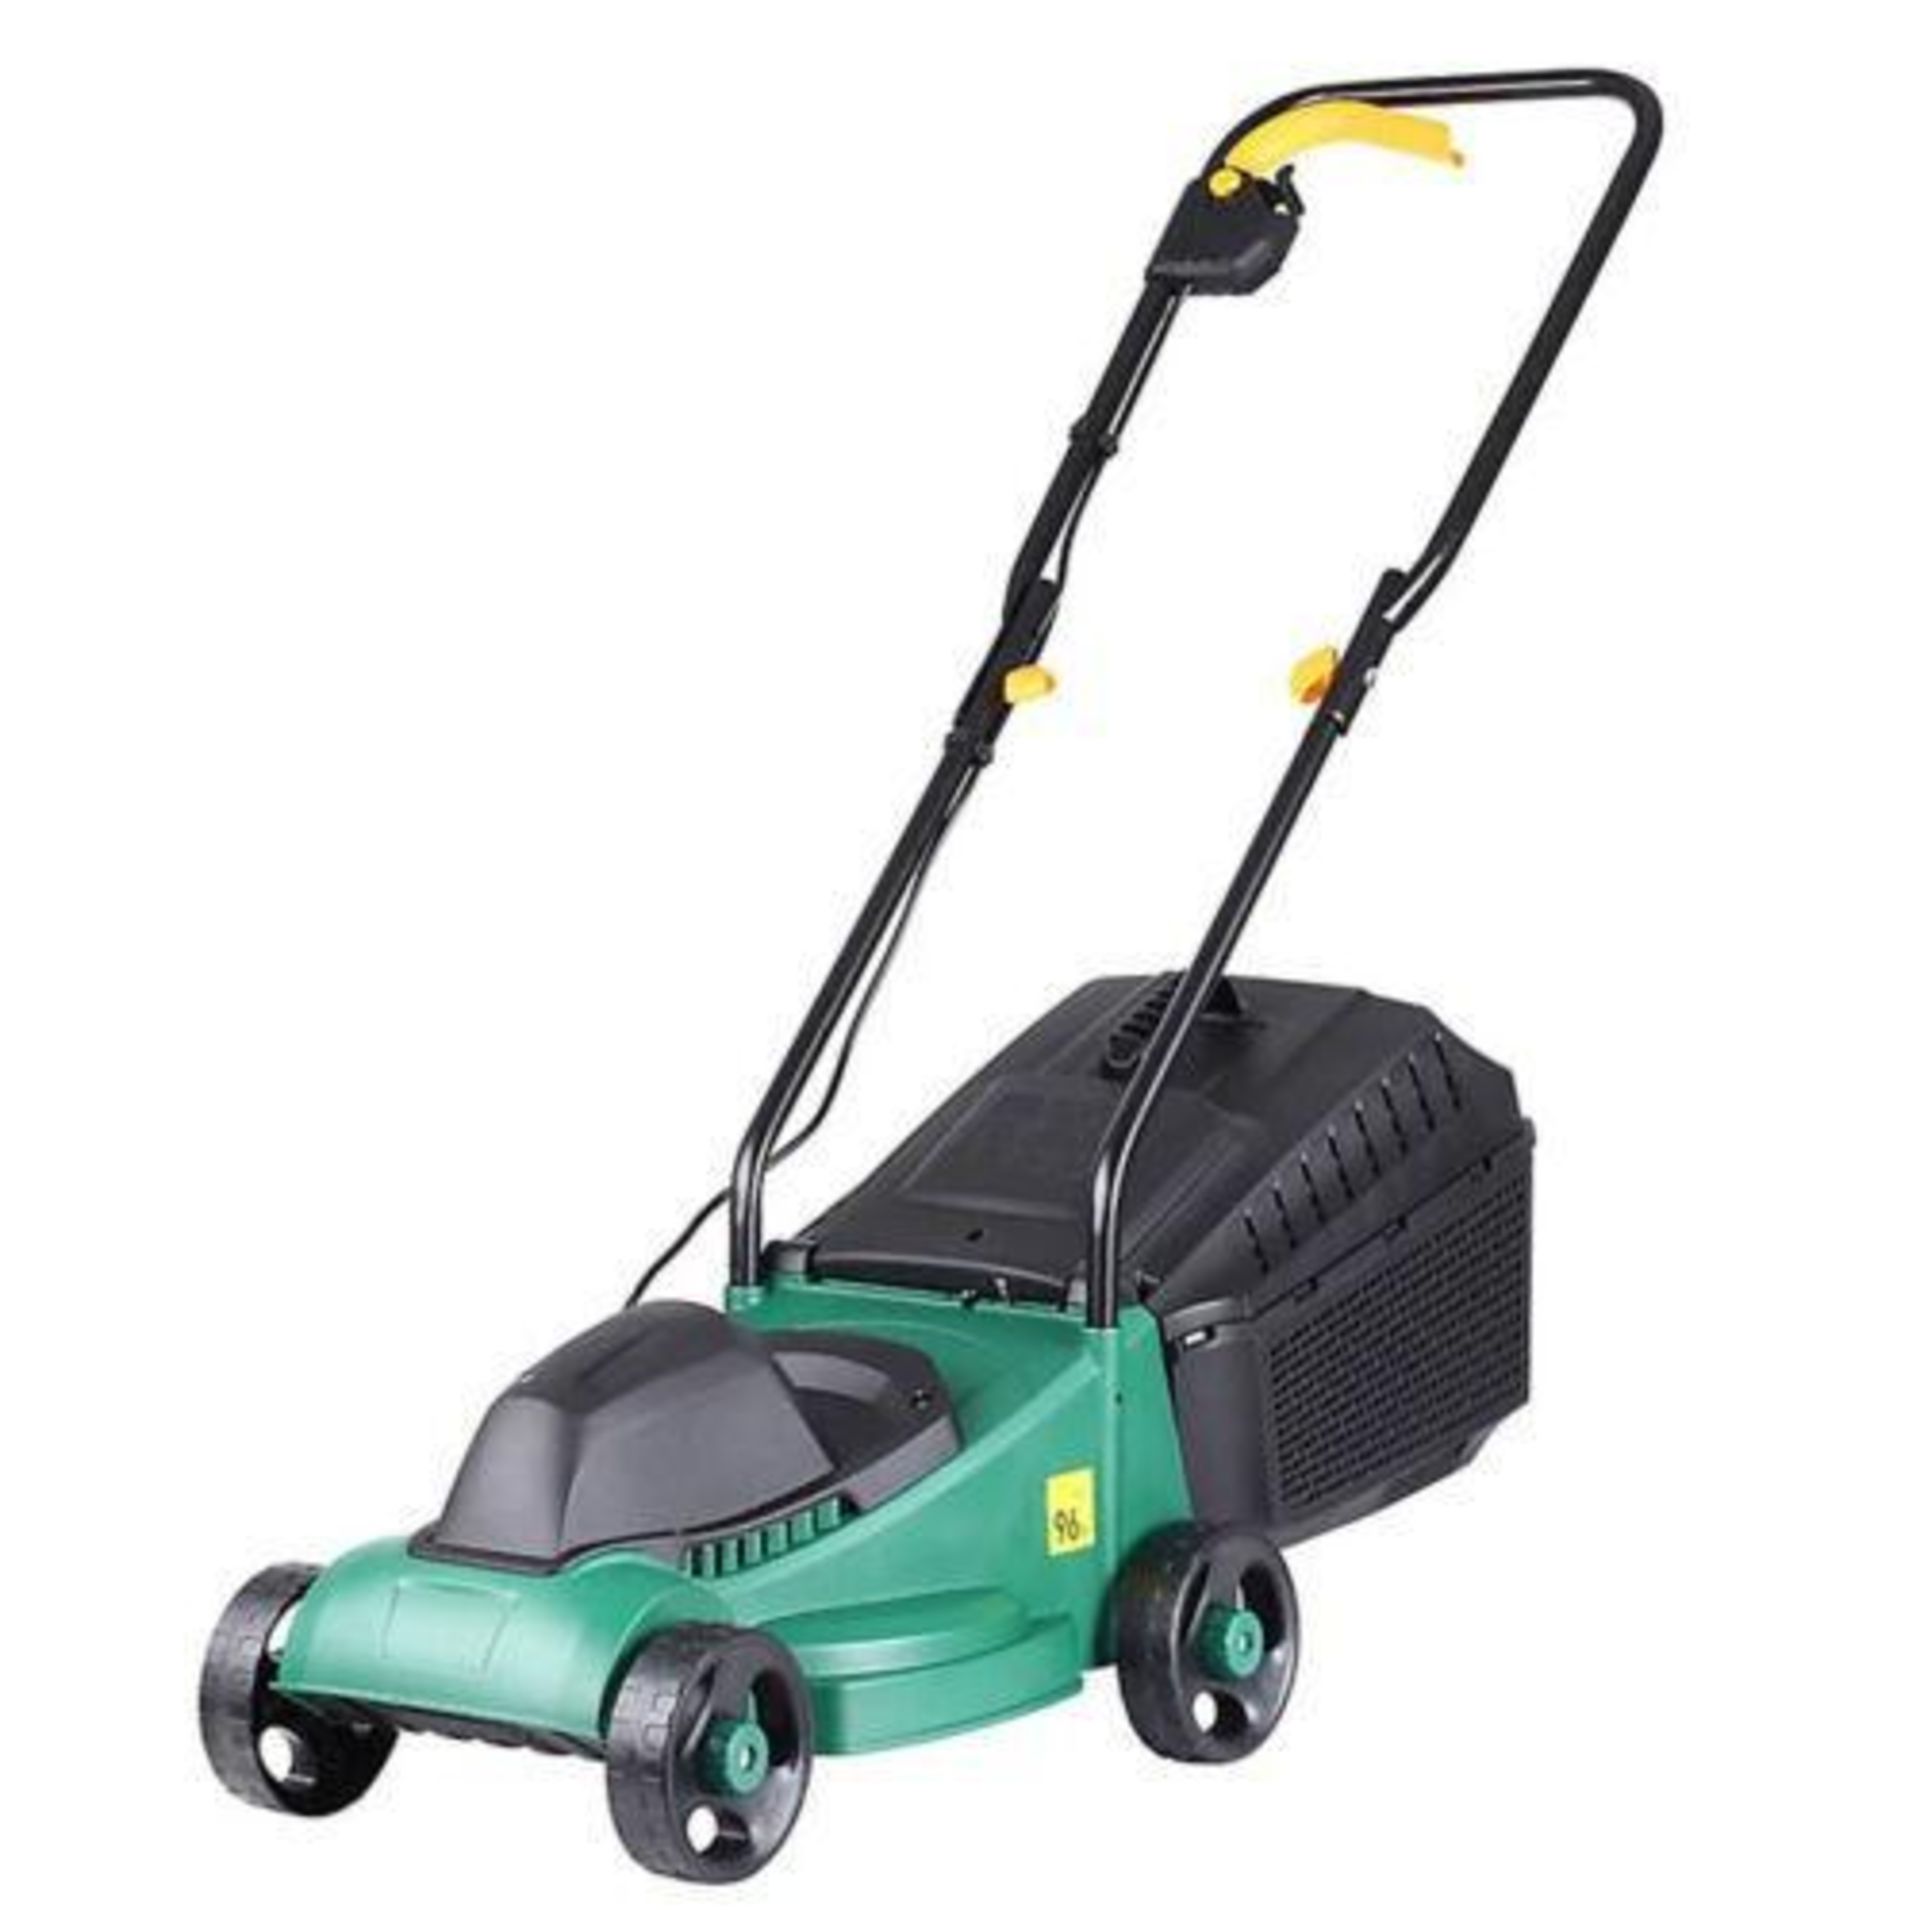 B&Q M3E1032G Corded Rotary Lawnmower (R45). 32cm lawnmower with a 27L grass collection capacity. 1.